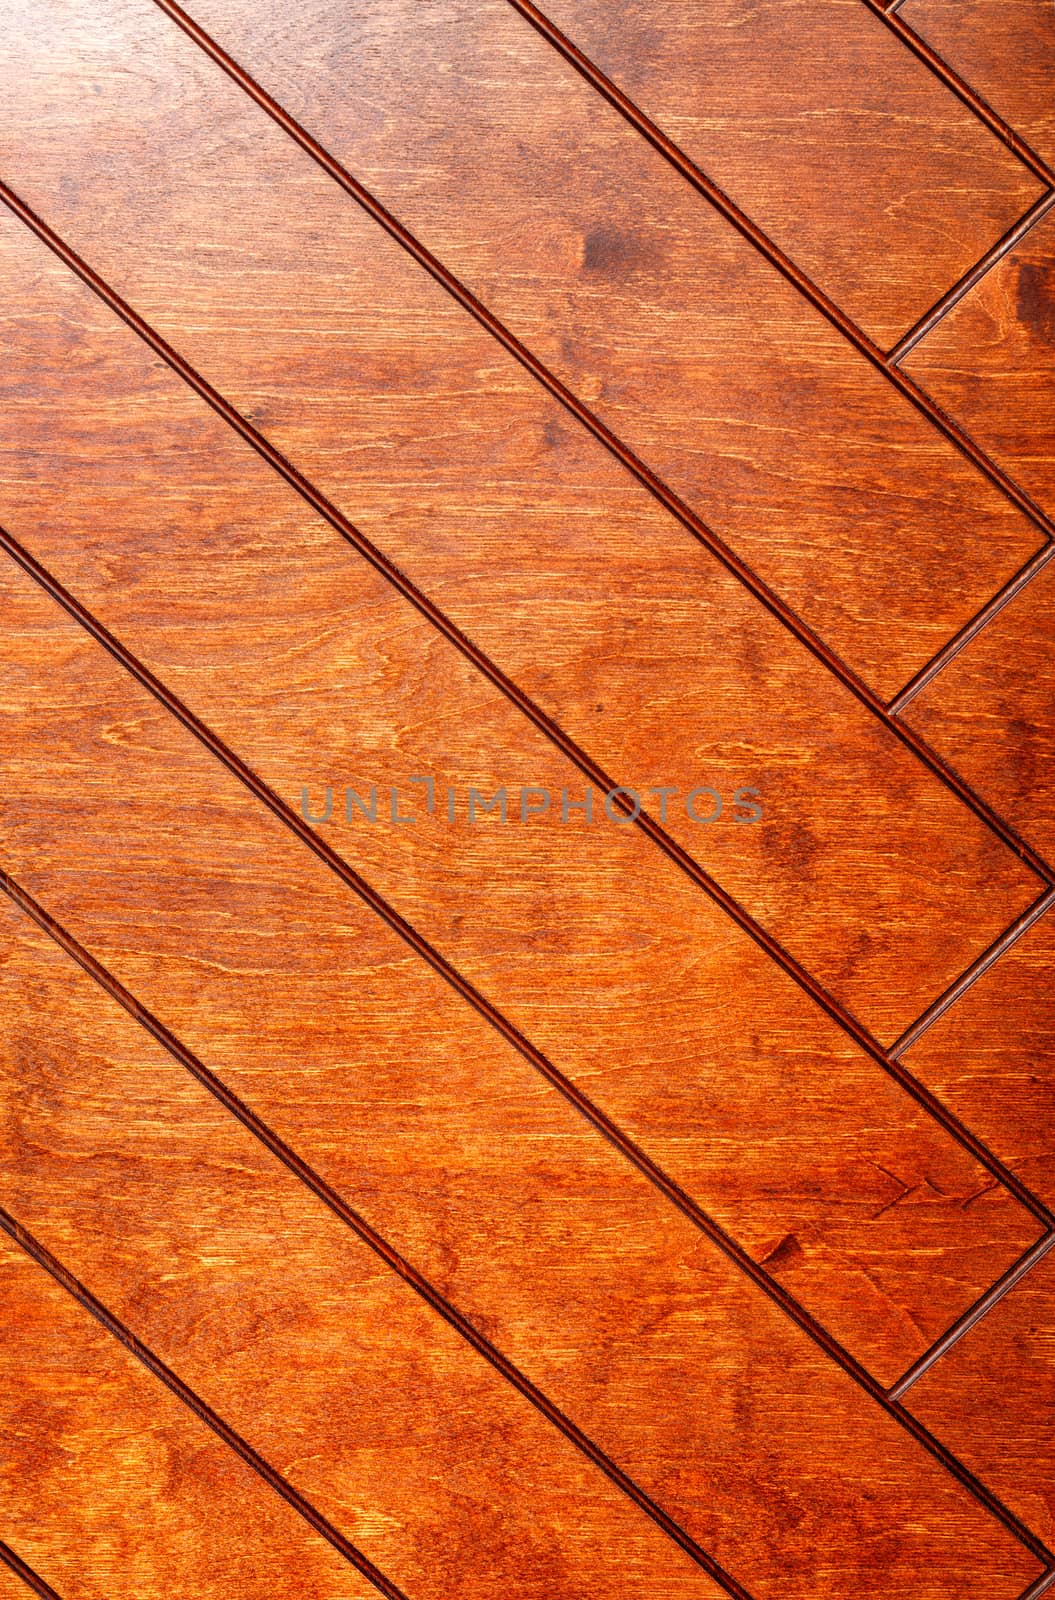 Old wooden boards painted with orange paint form a herringbone pattern, wood texture. by Sergii